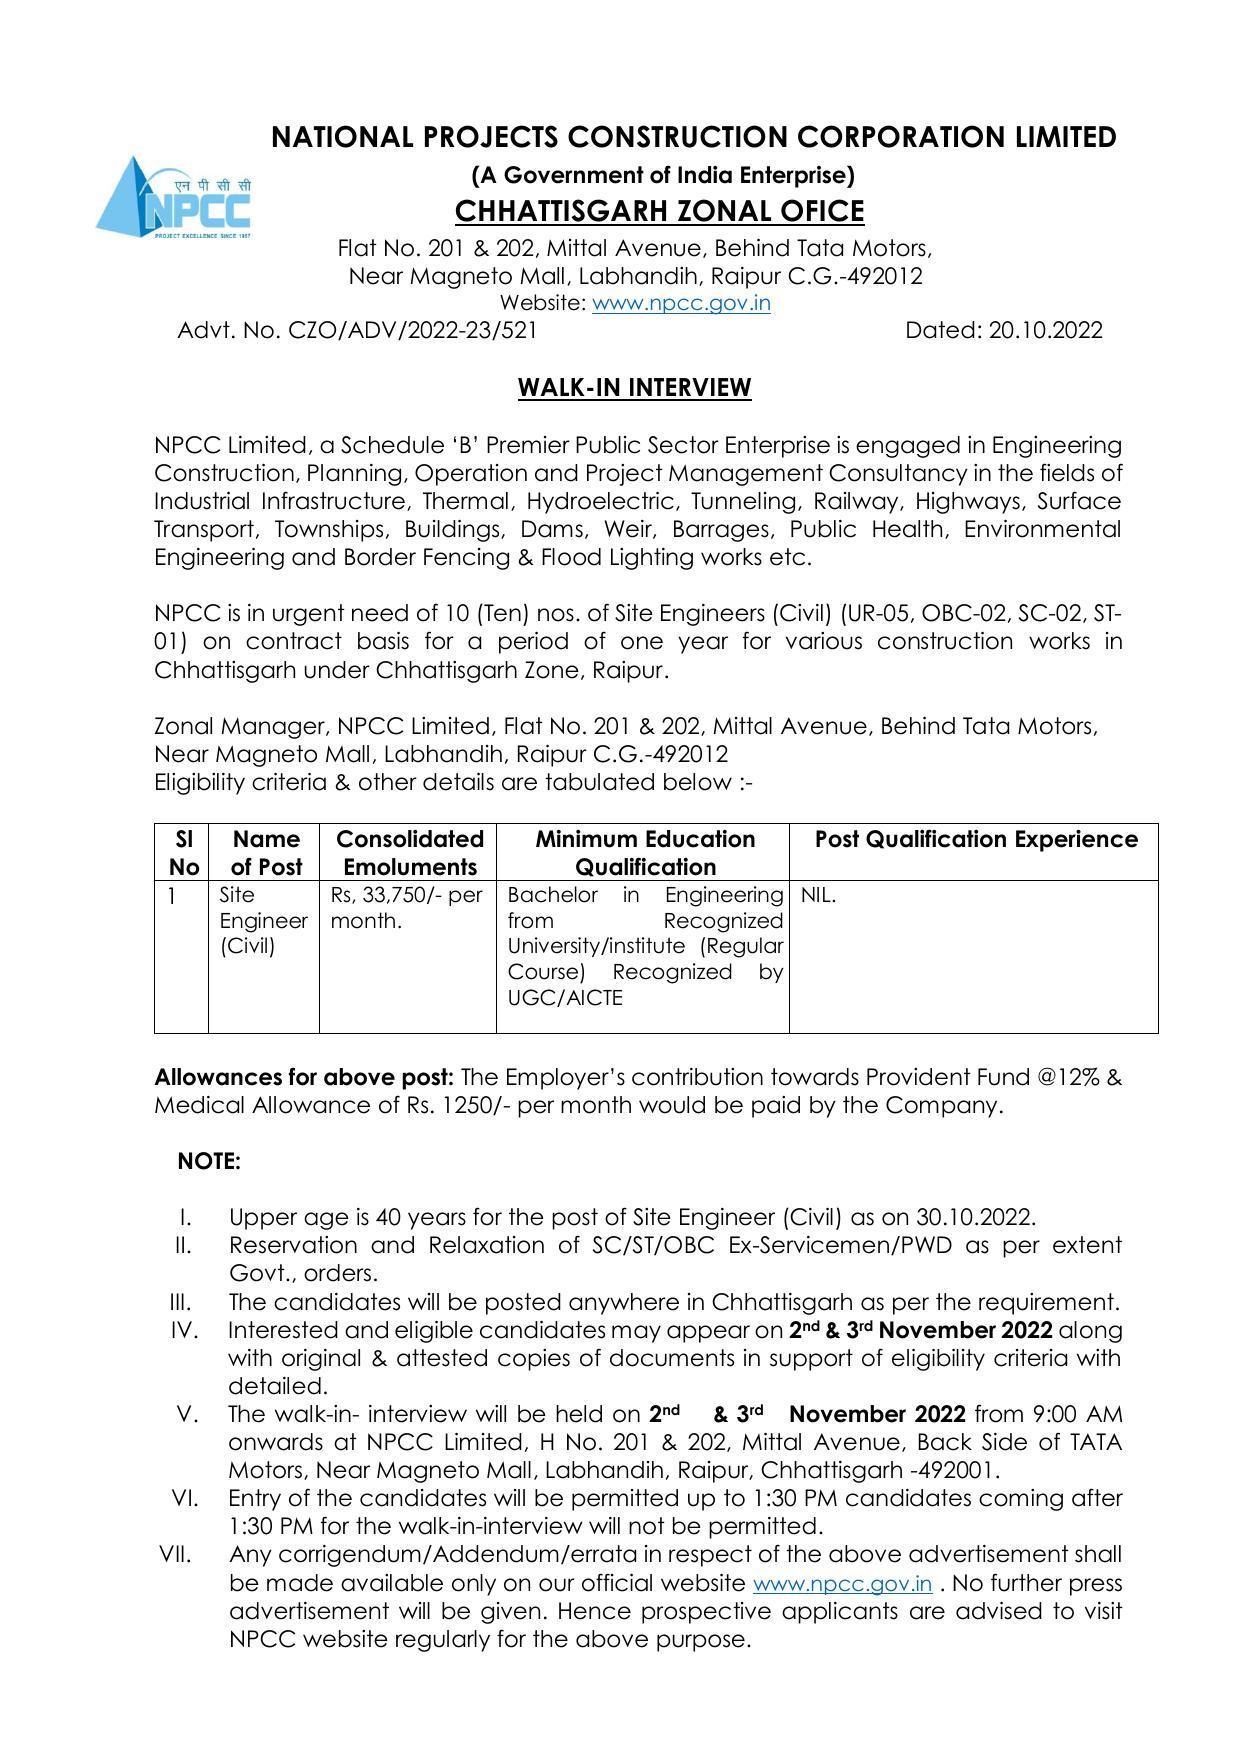 NPCC Invites Application for 10 Site Engineer Recruitment 2022 - Page 3